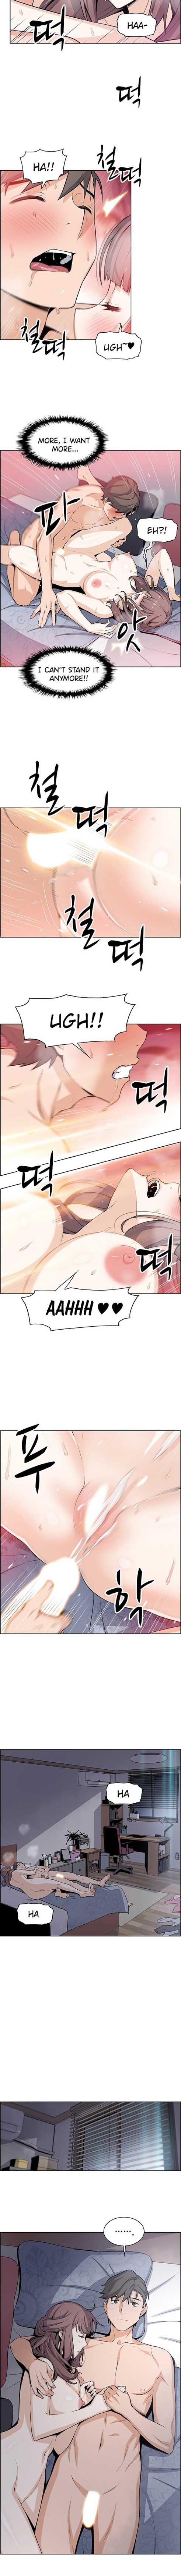 Housekeeper [Neck Pillow, Paper] Ch.49/49 [English] [Manhwa PDF] Completed 233